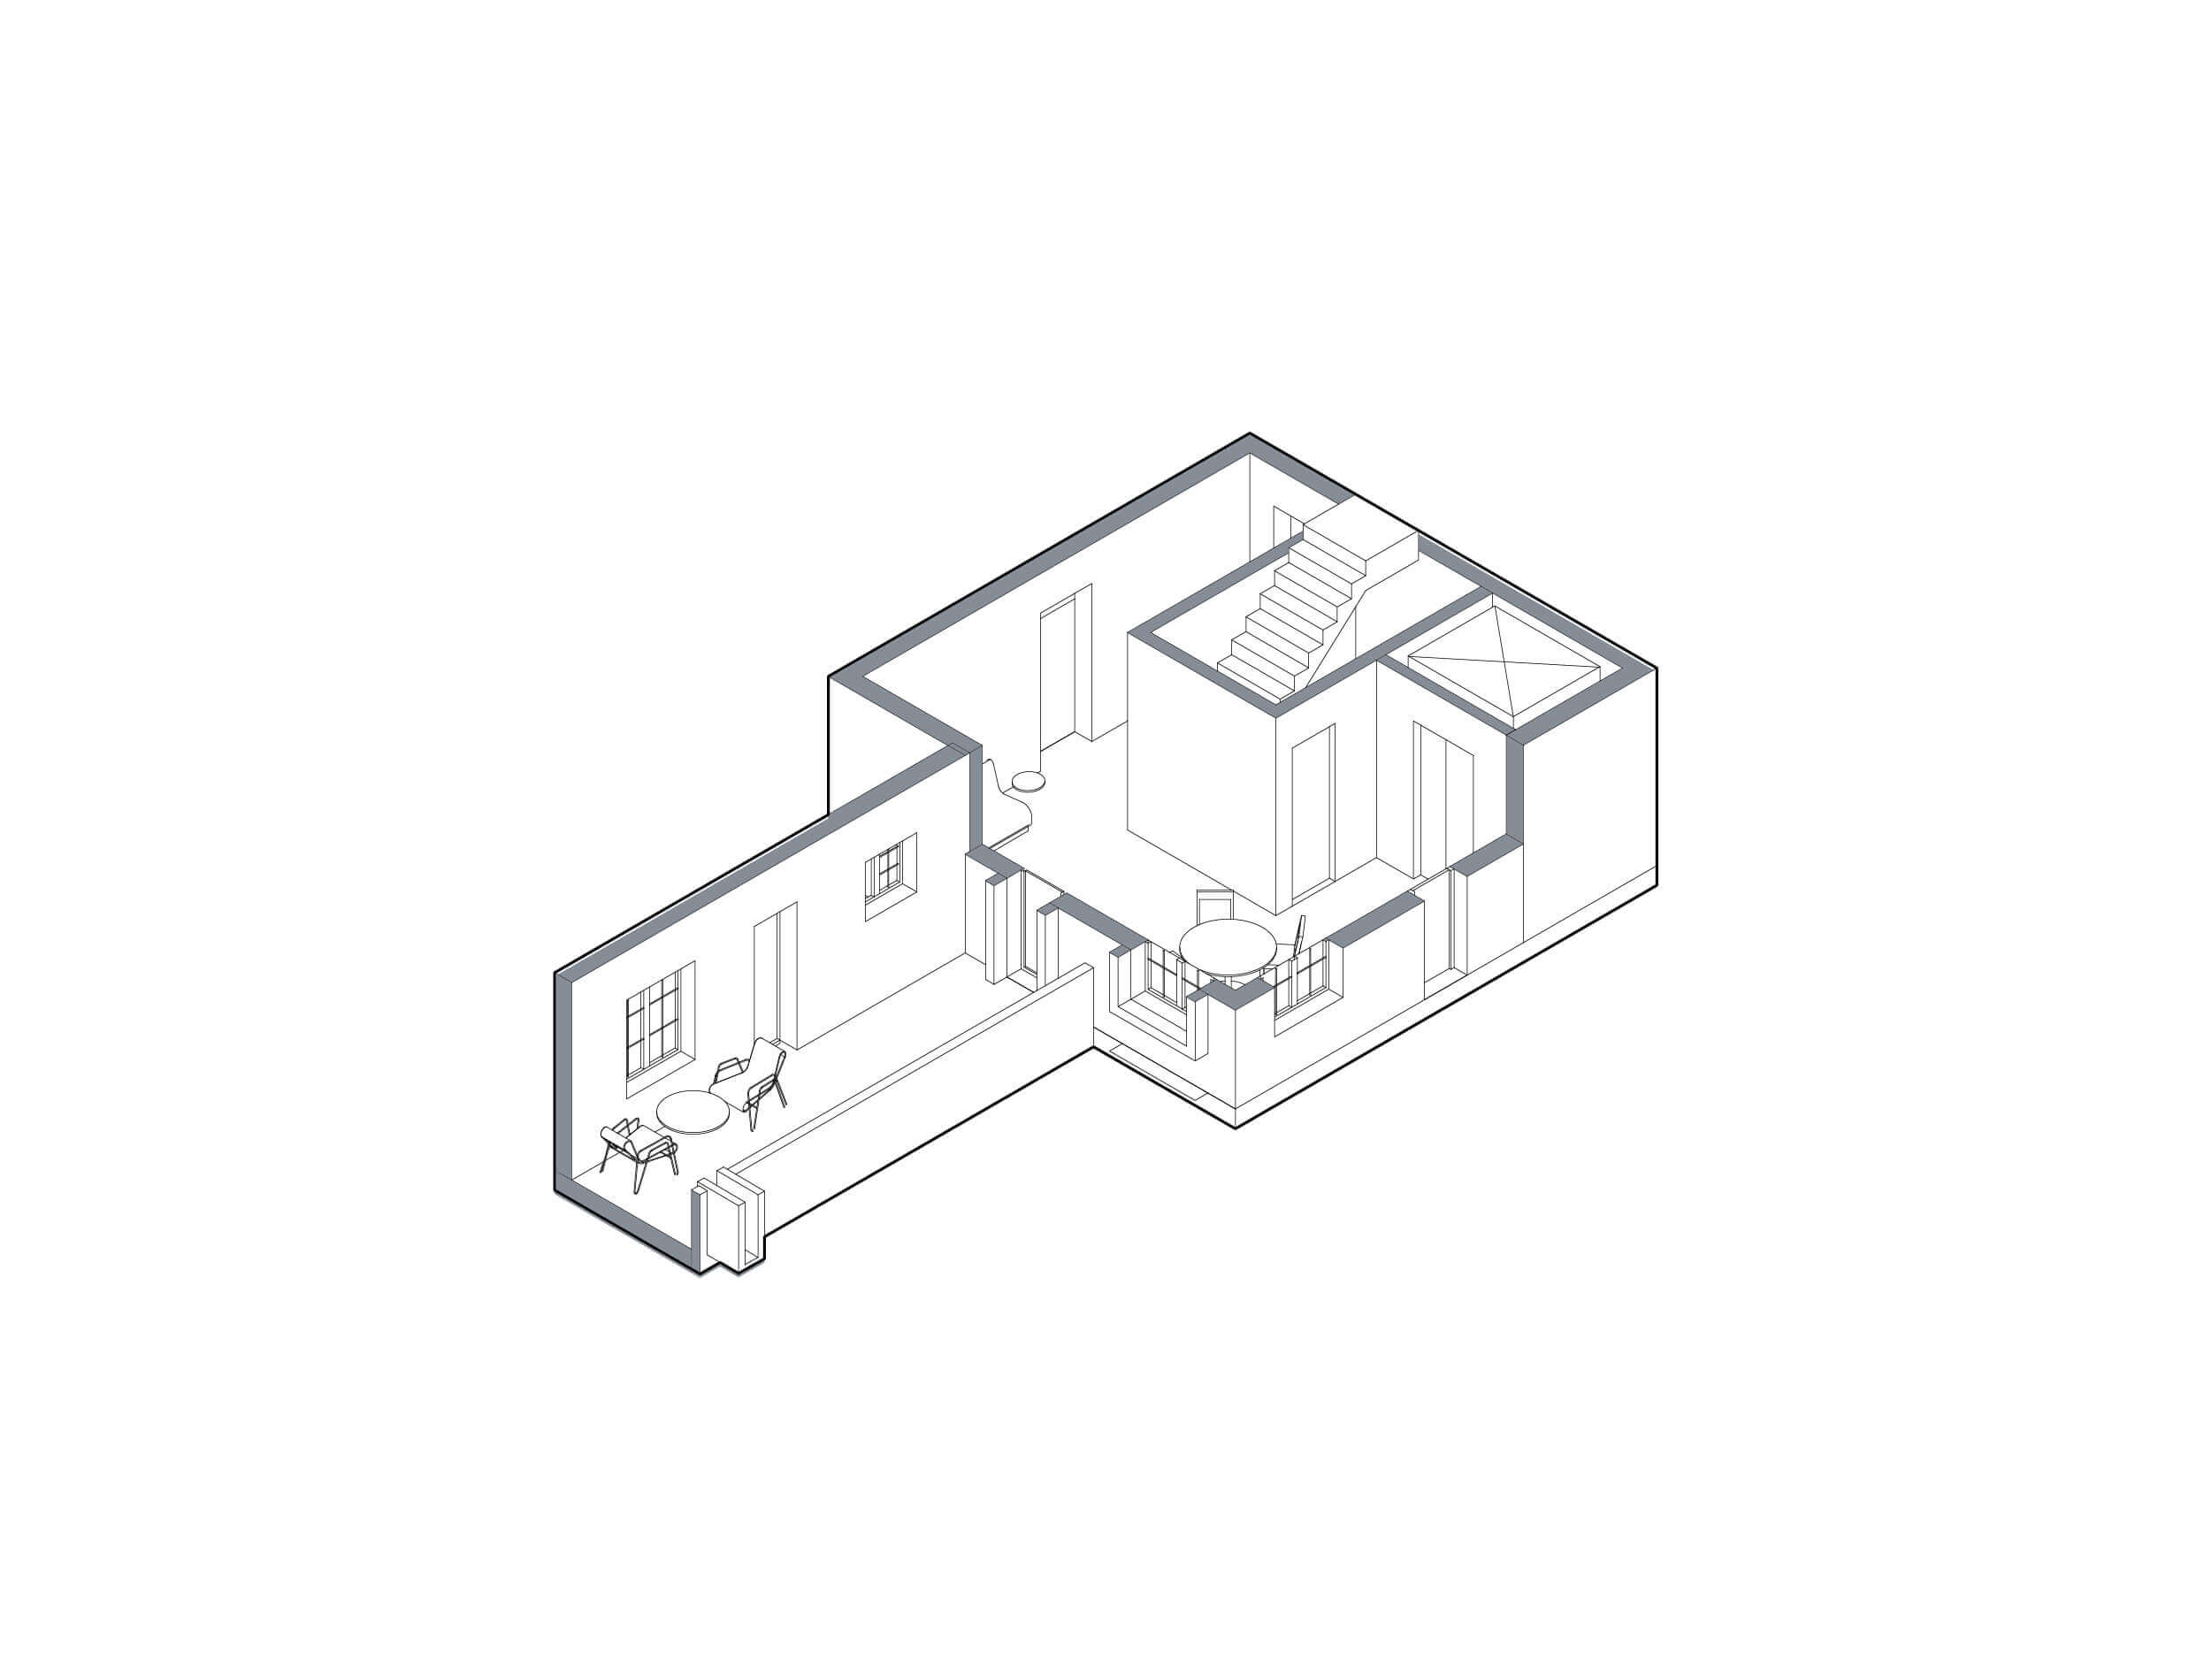 Axonometric detail drawing of a housing project